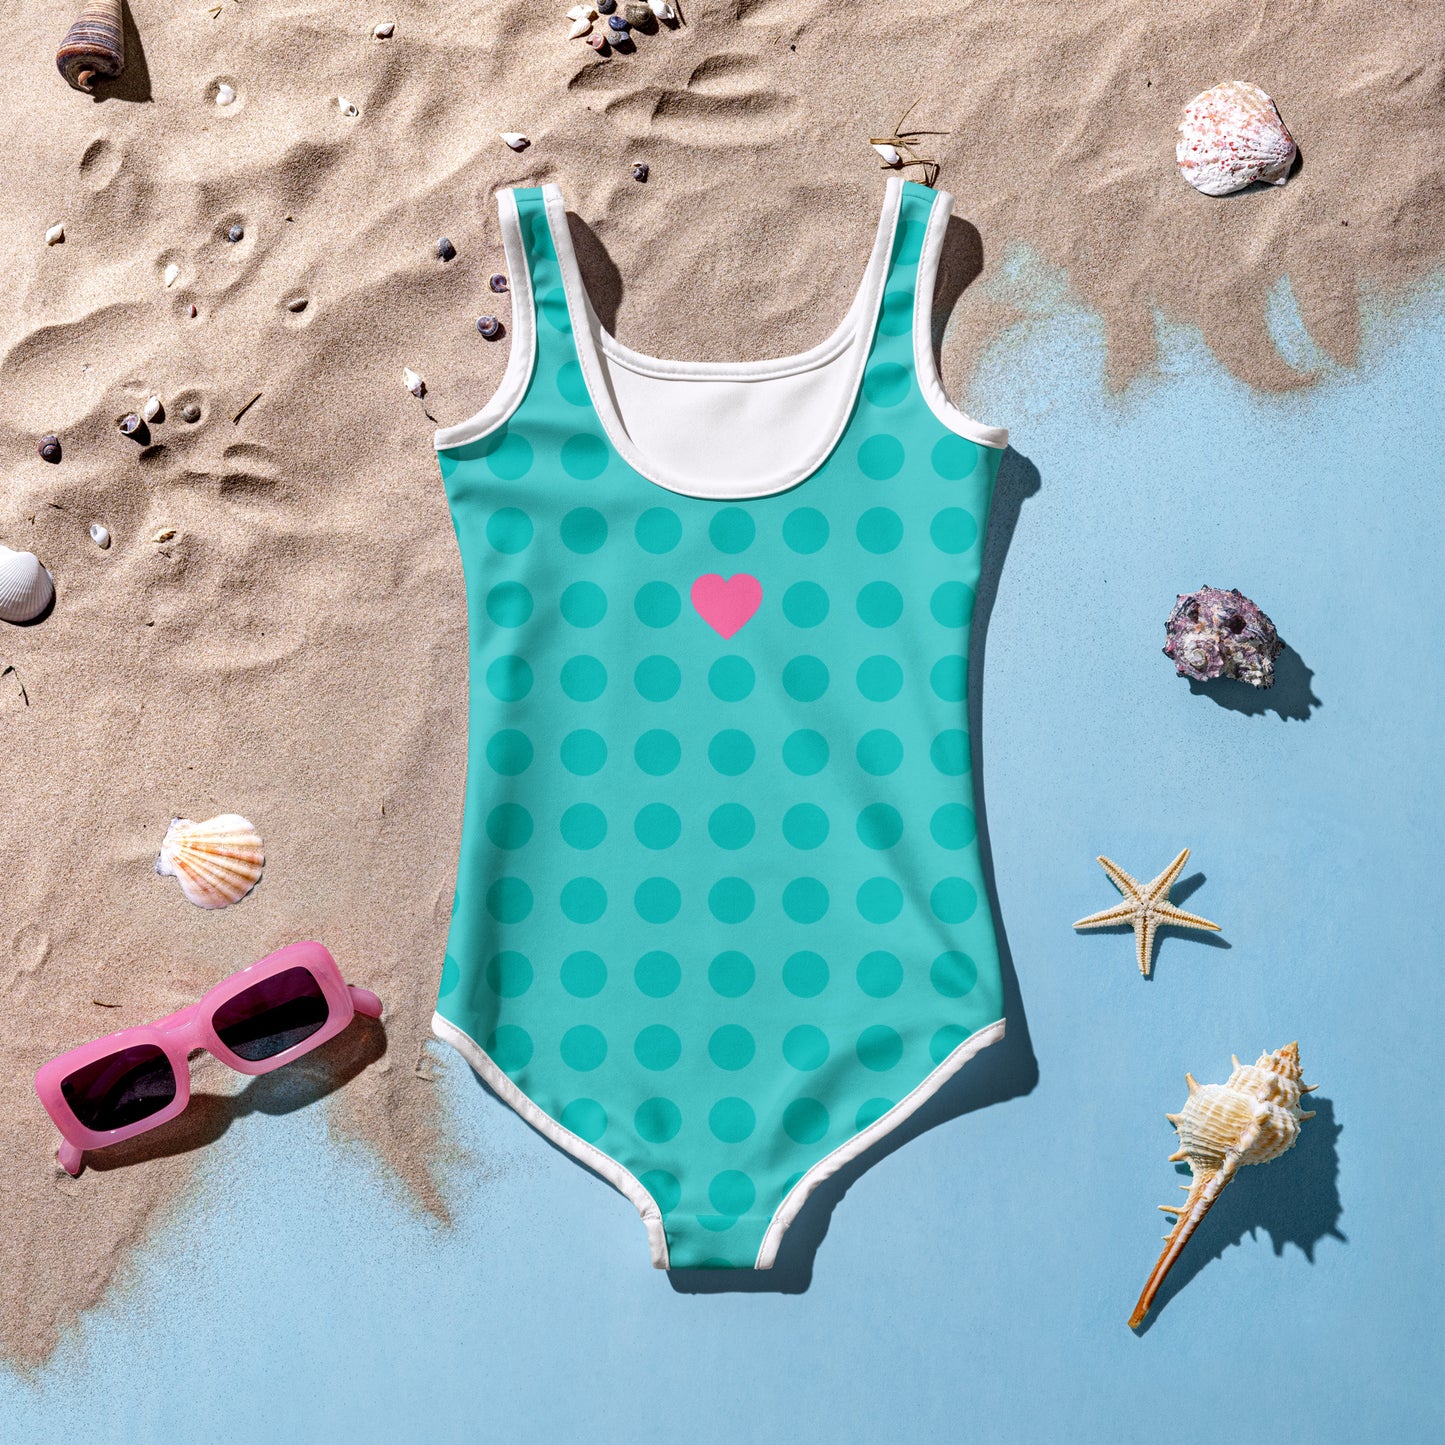 a bathing suit, sunglasses, starfish, and seashells on a beach